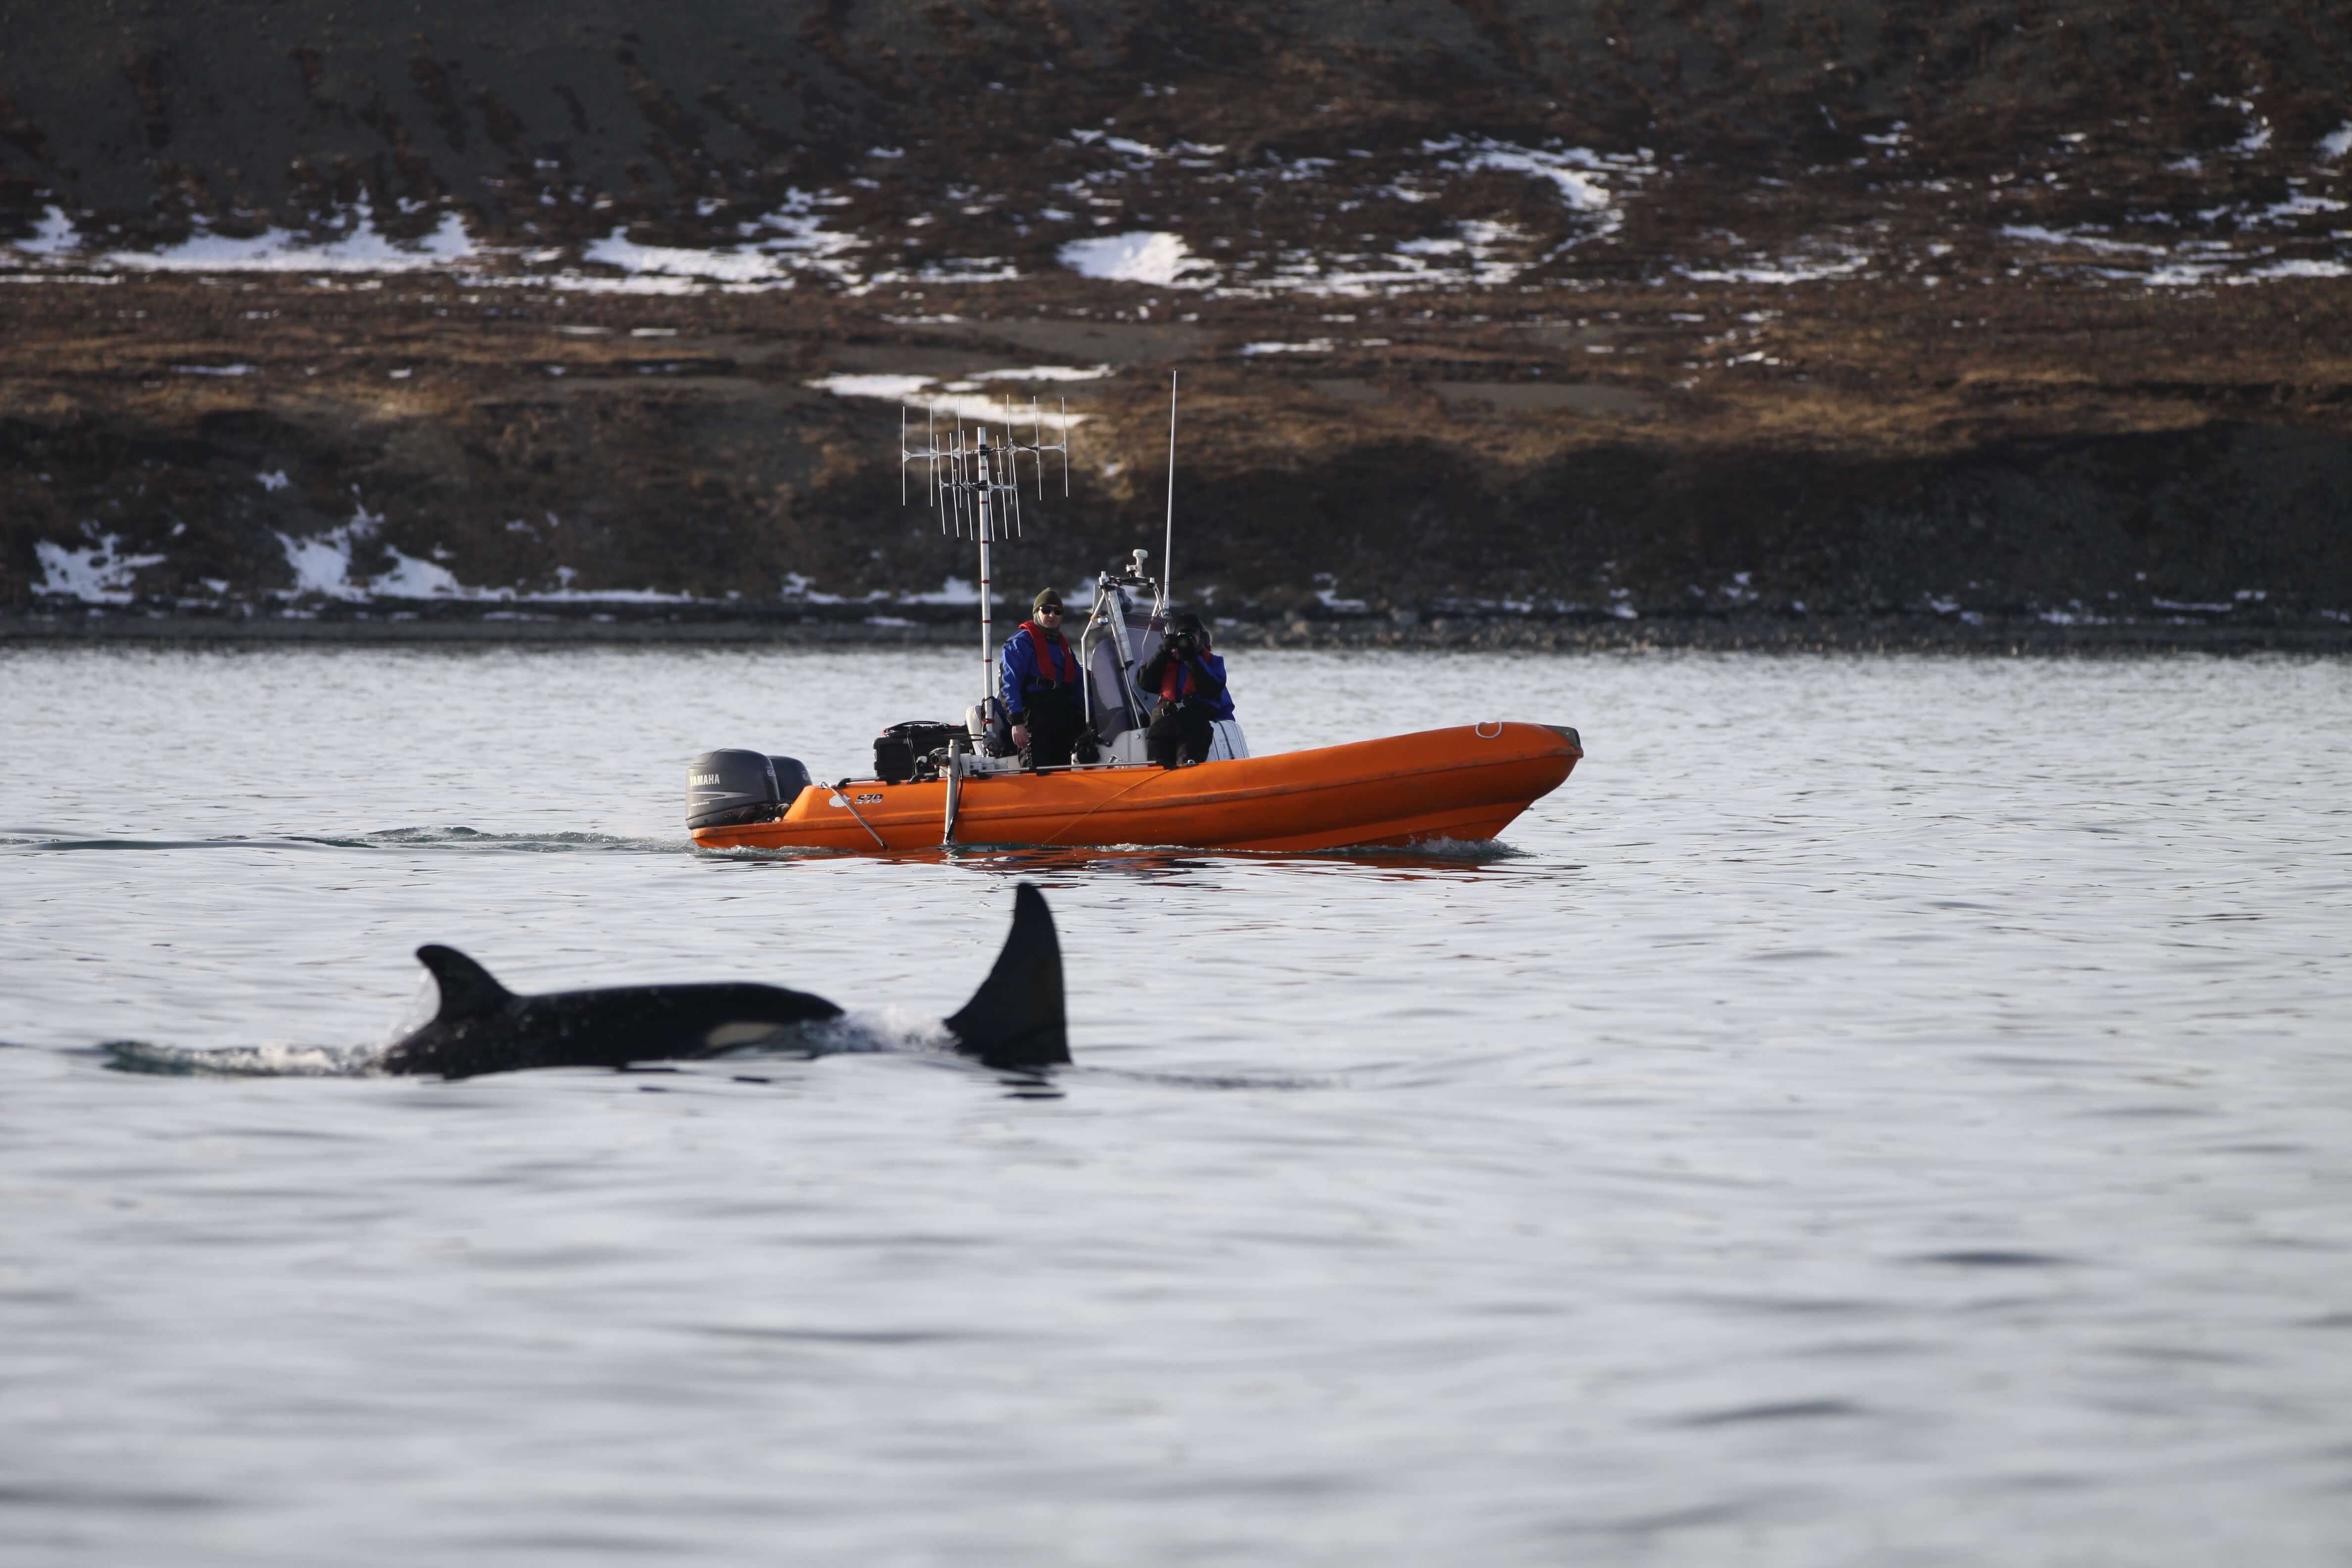 Researchers with killer whale